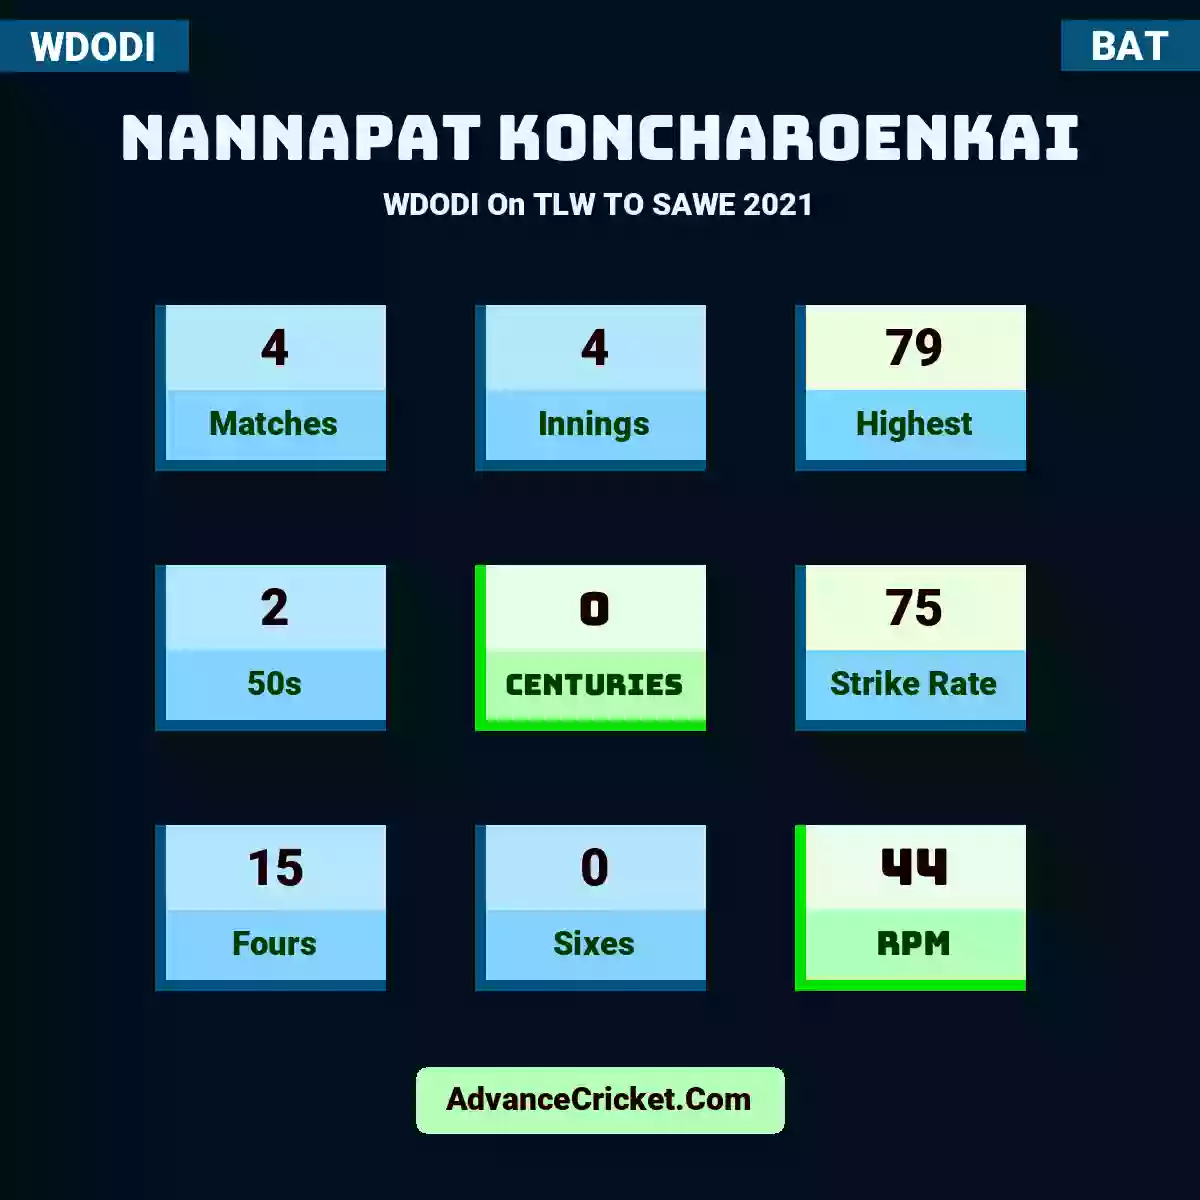 Nannapat Koncharoenkai WDODI  On TLW TO SAWE 2021, Nannapat Koncharoenkai played 4 matches, scored 79 runs as highest, 2 half-centuries, and 0 centuries, with a strike rate of 75. N.Koncharoenkai hit 15 fours and 0 sixes, with an RPM of 44.